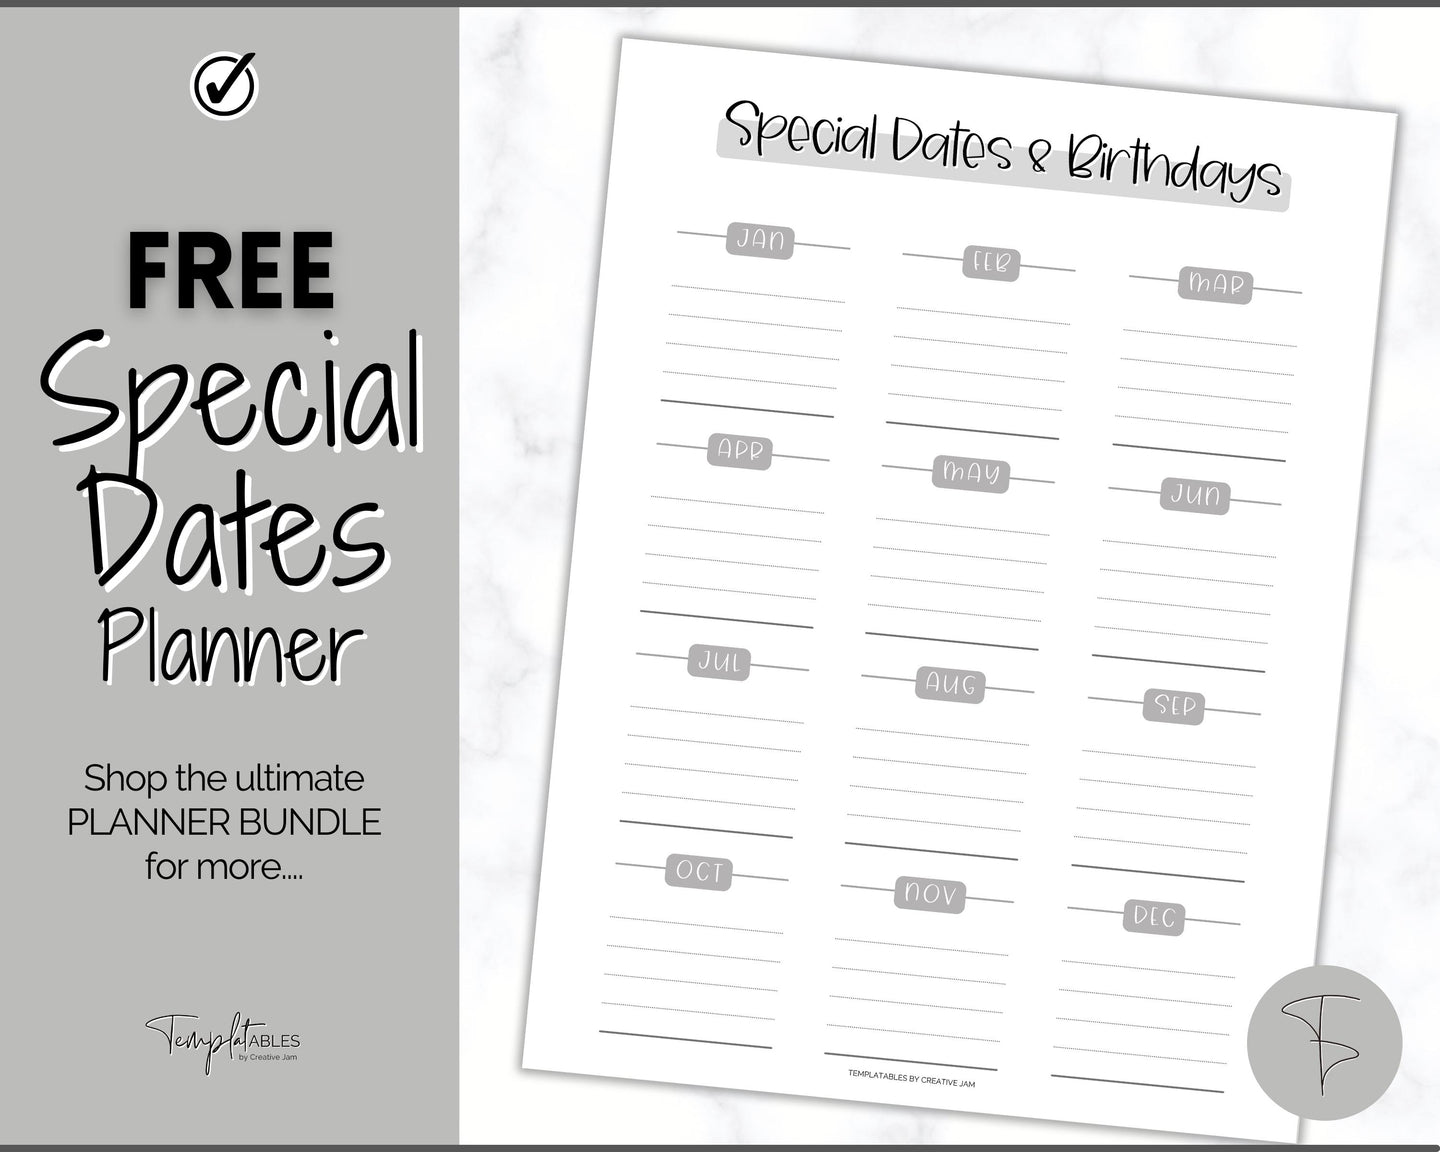 FREE - Special Dates Planner Printable, Annual Calendar, Birthday & Anniversary Reminders, Undated | Mono